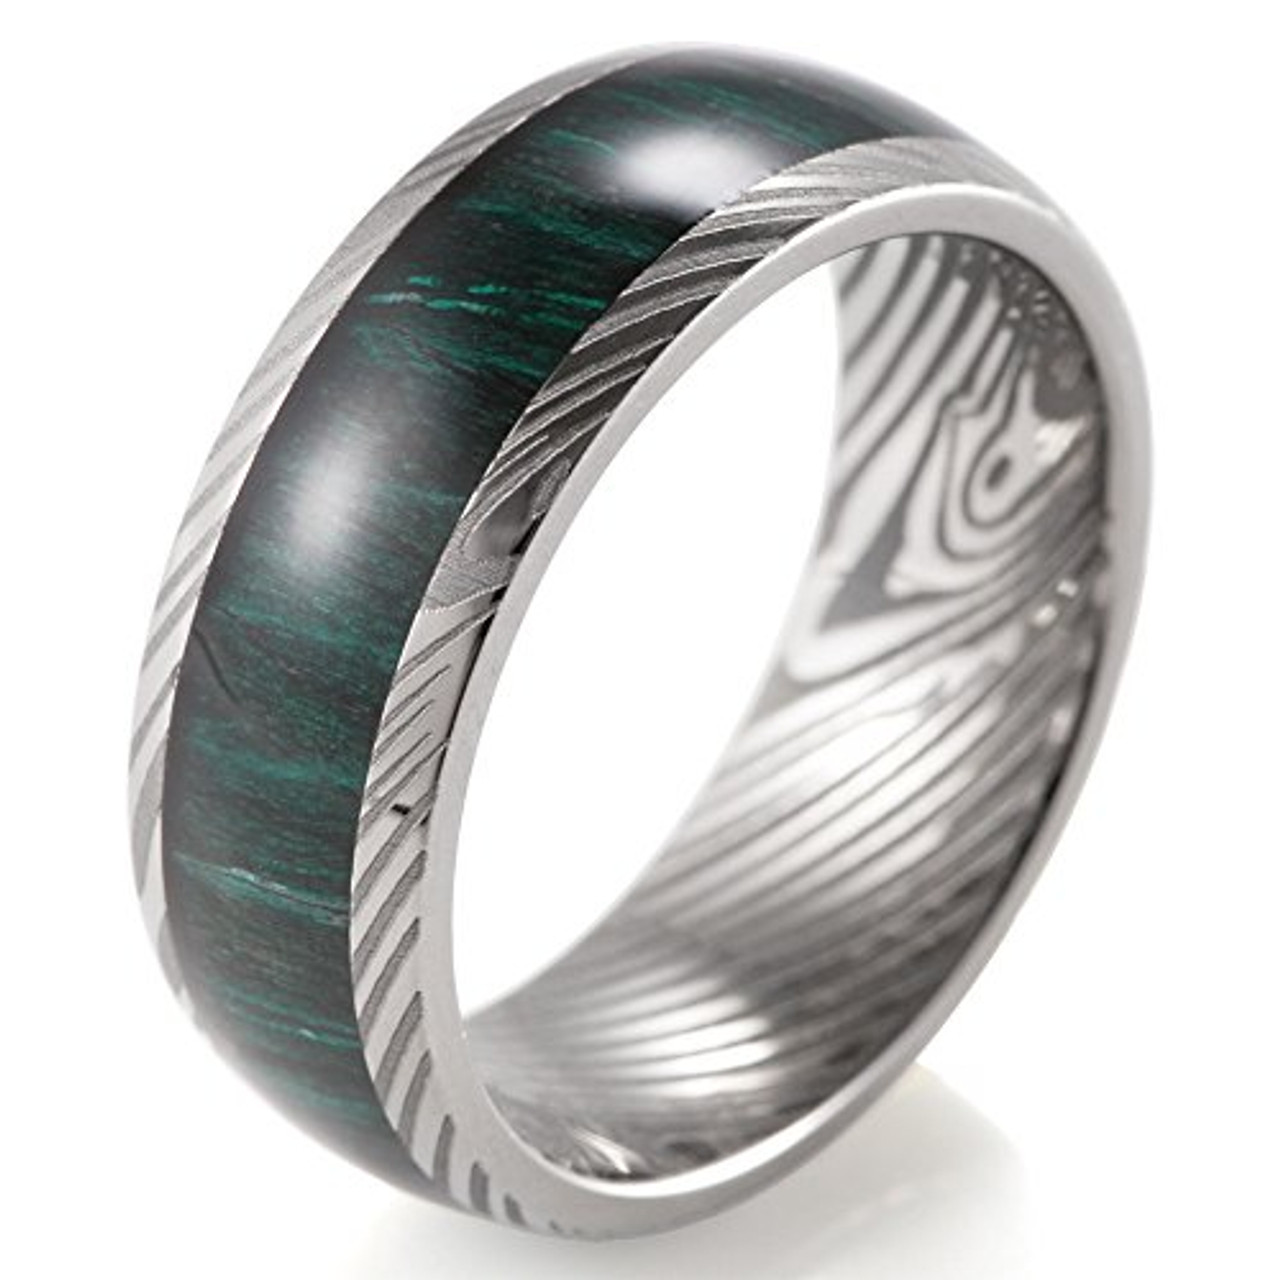 (8mm)  Unisex or Men's Inspired Damascus - Titanium Ring with Faux Engraved Damascus Stripes and Green Wood Domed Top